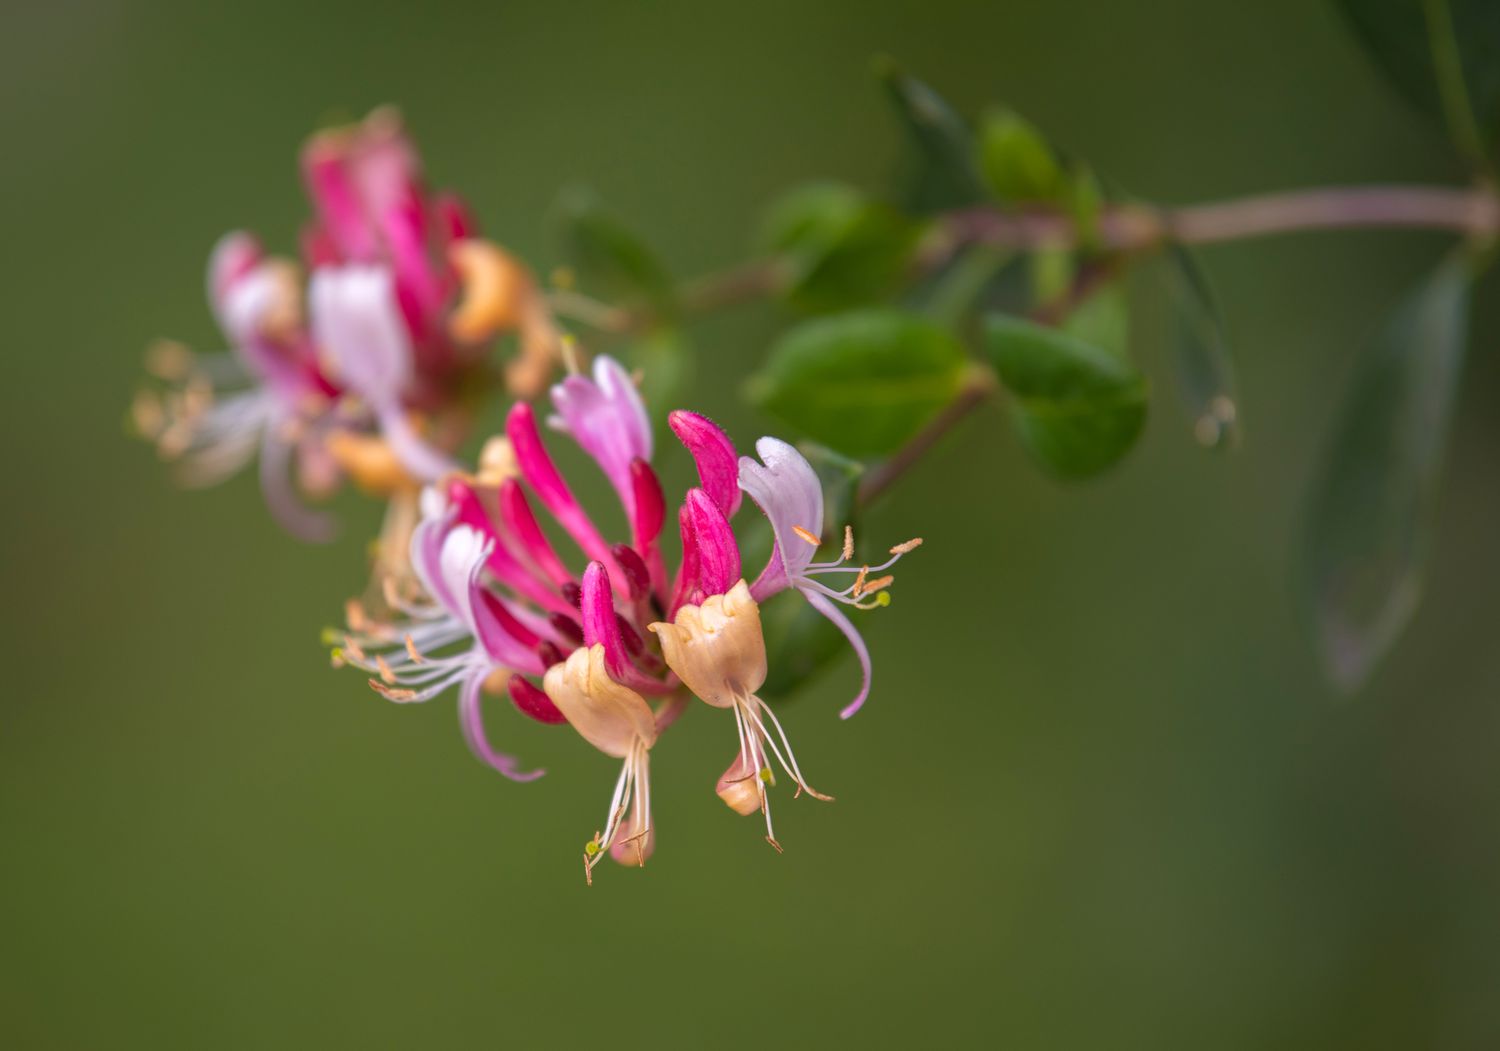 Common honeysuckle plant with tubular pink and yellow flowers closeup